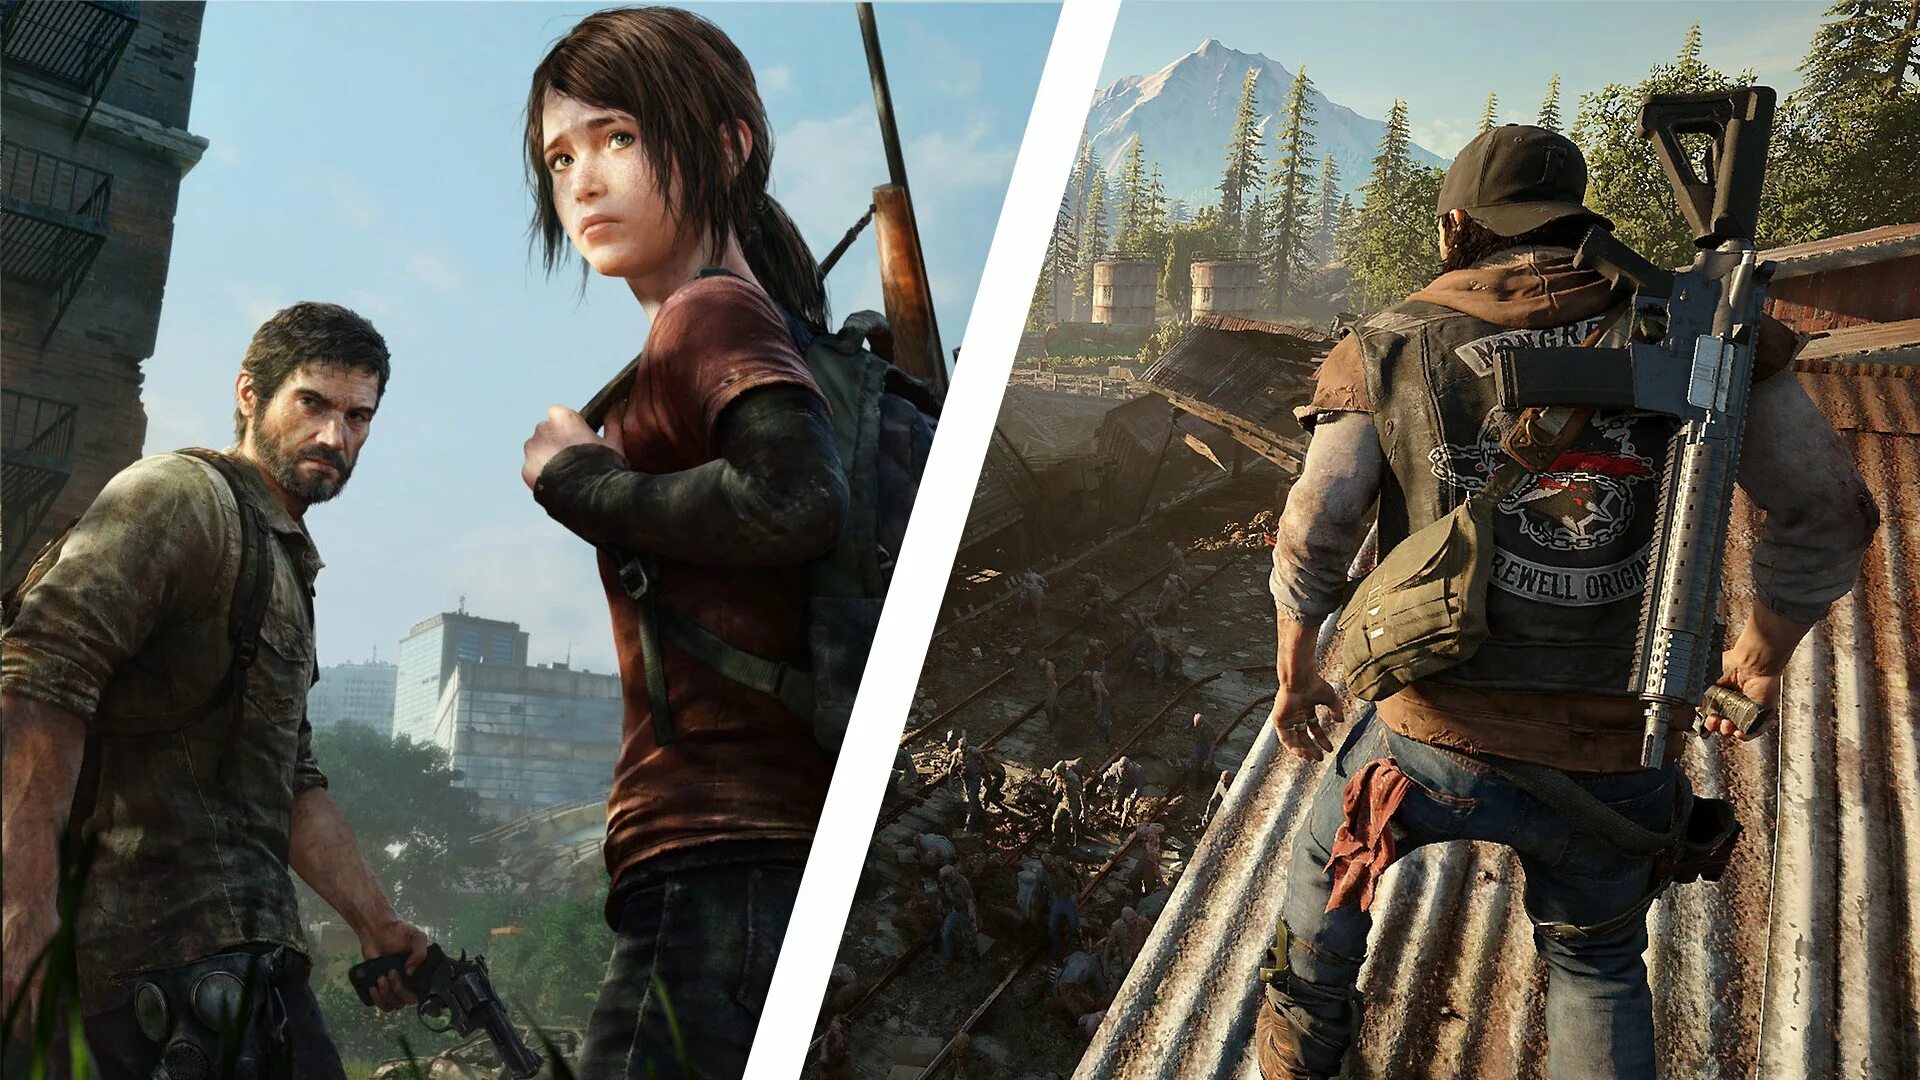 Brothers remake ps5. The last of us Remake ps5. Days gone 2 Дата выхода. Days gone и last of us. Days gone 2 Дата выхода ps4.